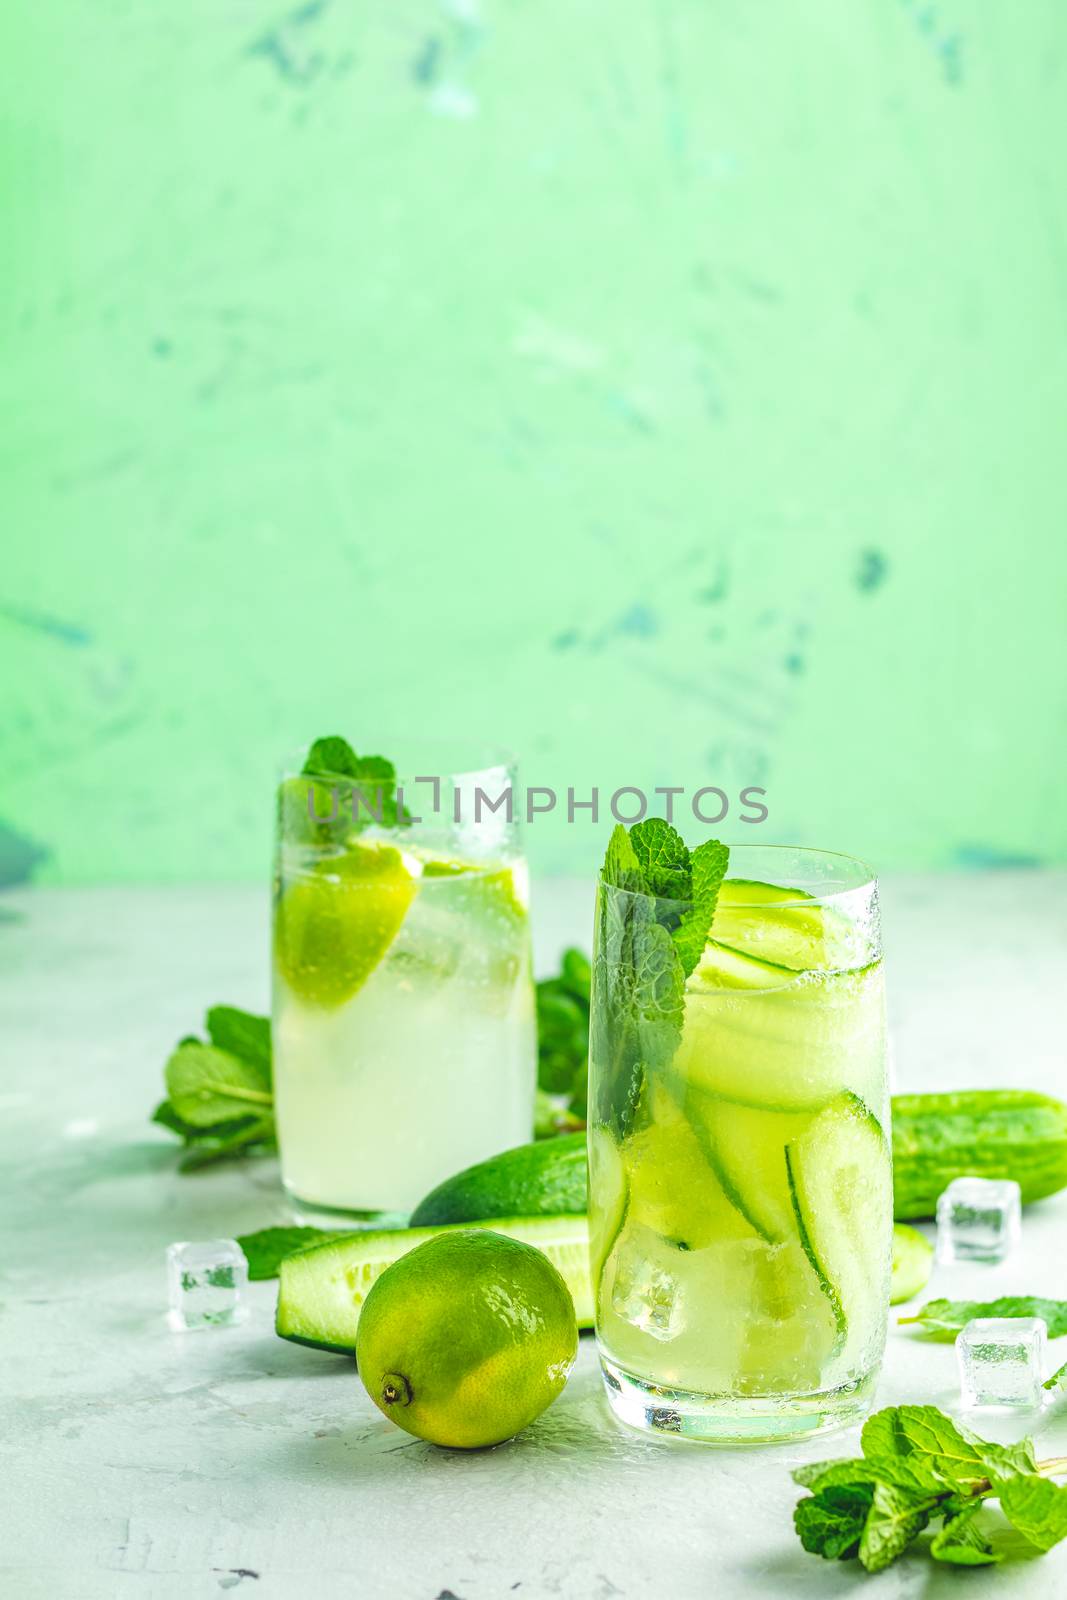 Detox cocktail of mint, cucumber and lemon and mojito cocktail with lime and mint in highball glasses on a gray concrete stone surface background. With copy space for your text